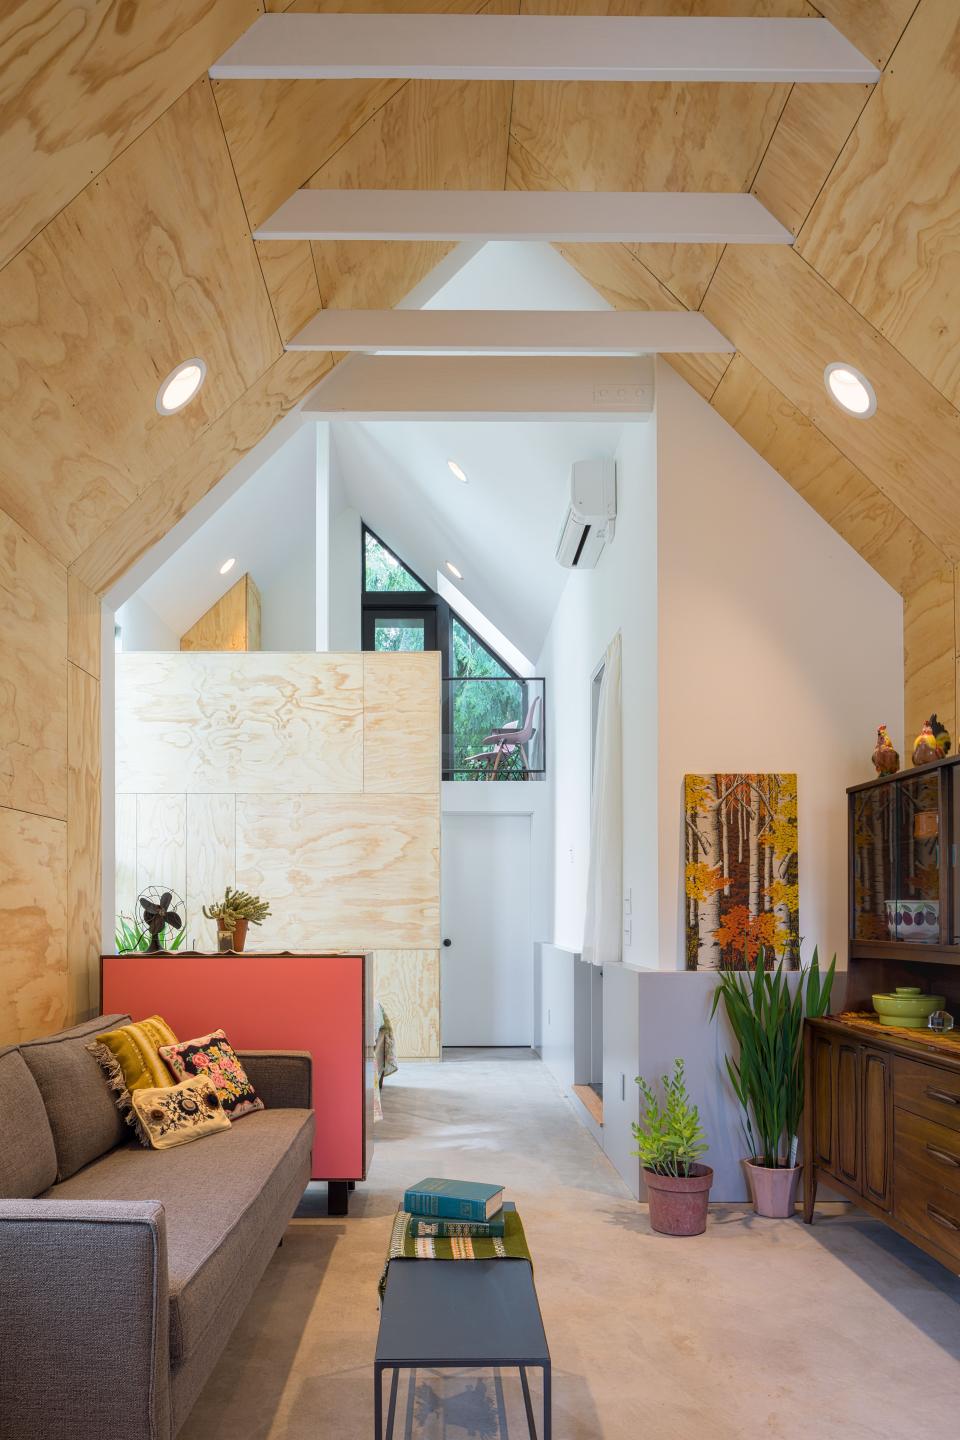 In contrast to the sleek exterior, the inside of the DADU (detached accessory dwelling unit) is voluminous and bright, finished with plywood panels and polished concrete floors. Making the most of 571 square feet, a simple vernacular shape and sight lines from the front door to the rear yard create a relaxed roominess.